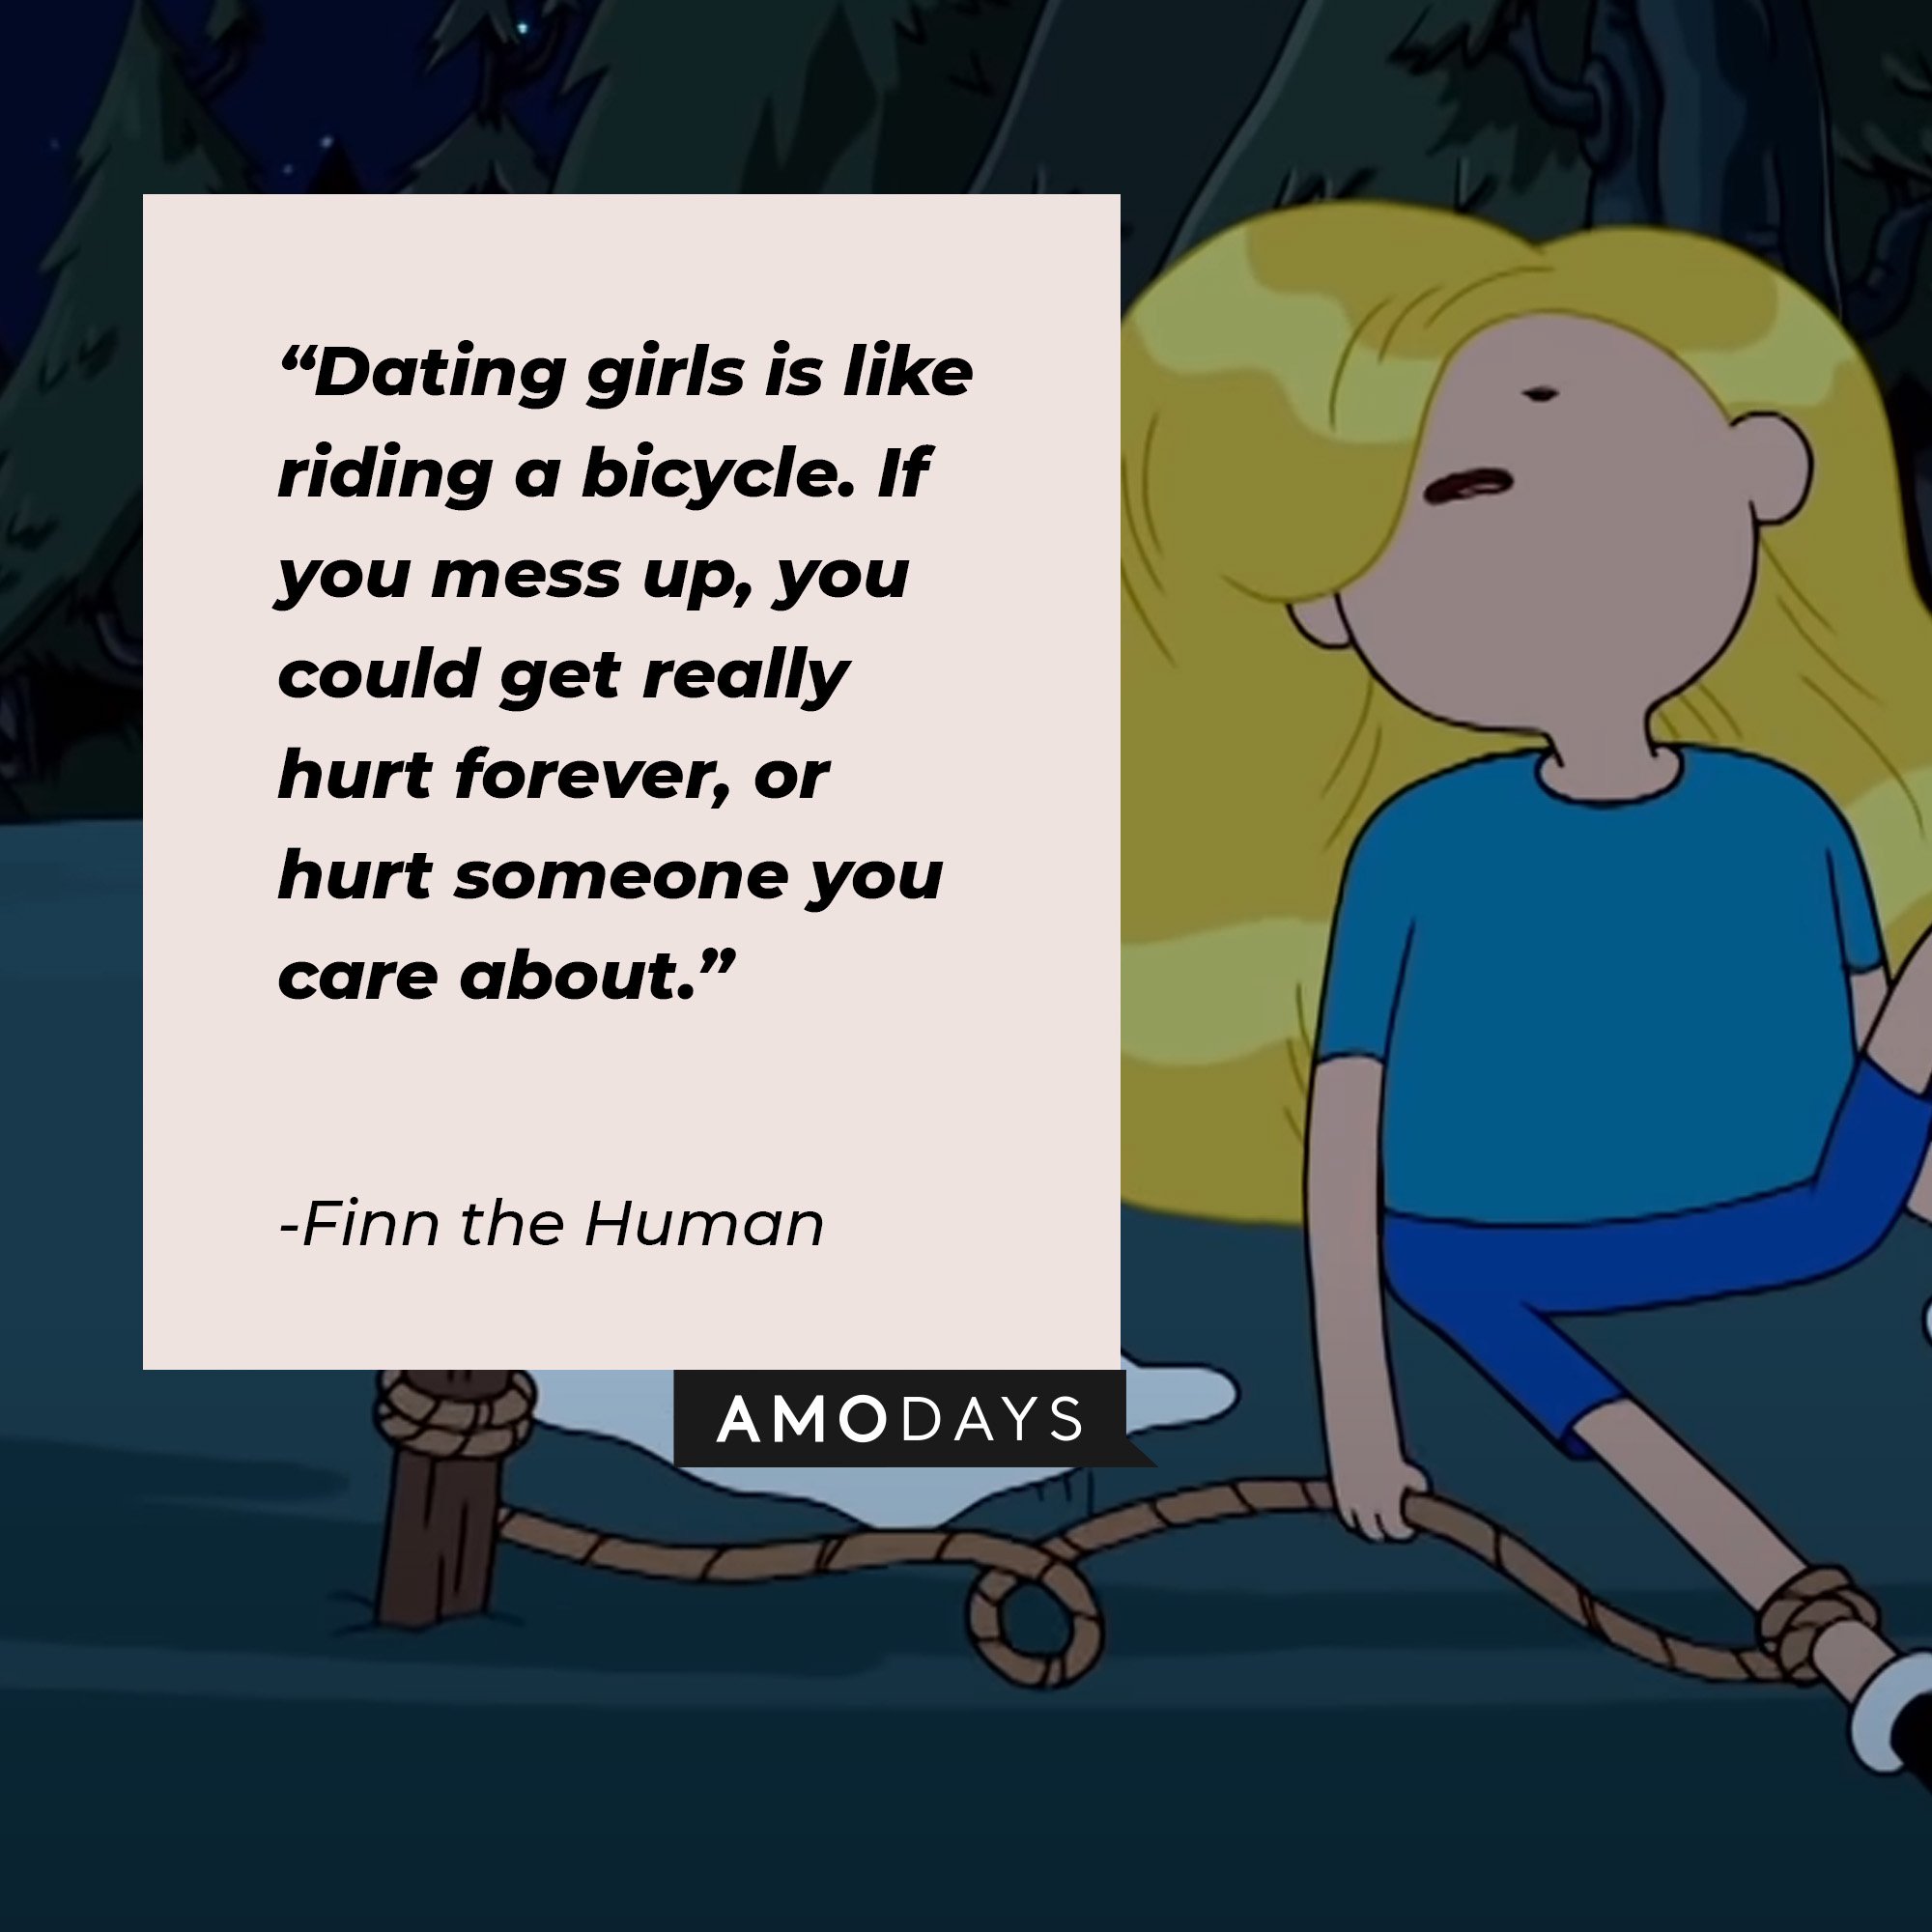  Finn the Human’s quote: “Dating girls is like riding a bicycle. If you mess up, you could get really hurt forever or hurt someone you care about.”| Image: AmoDays